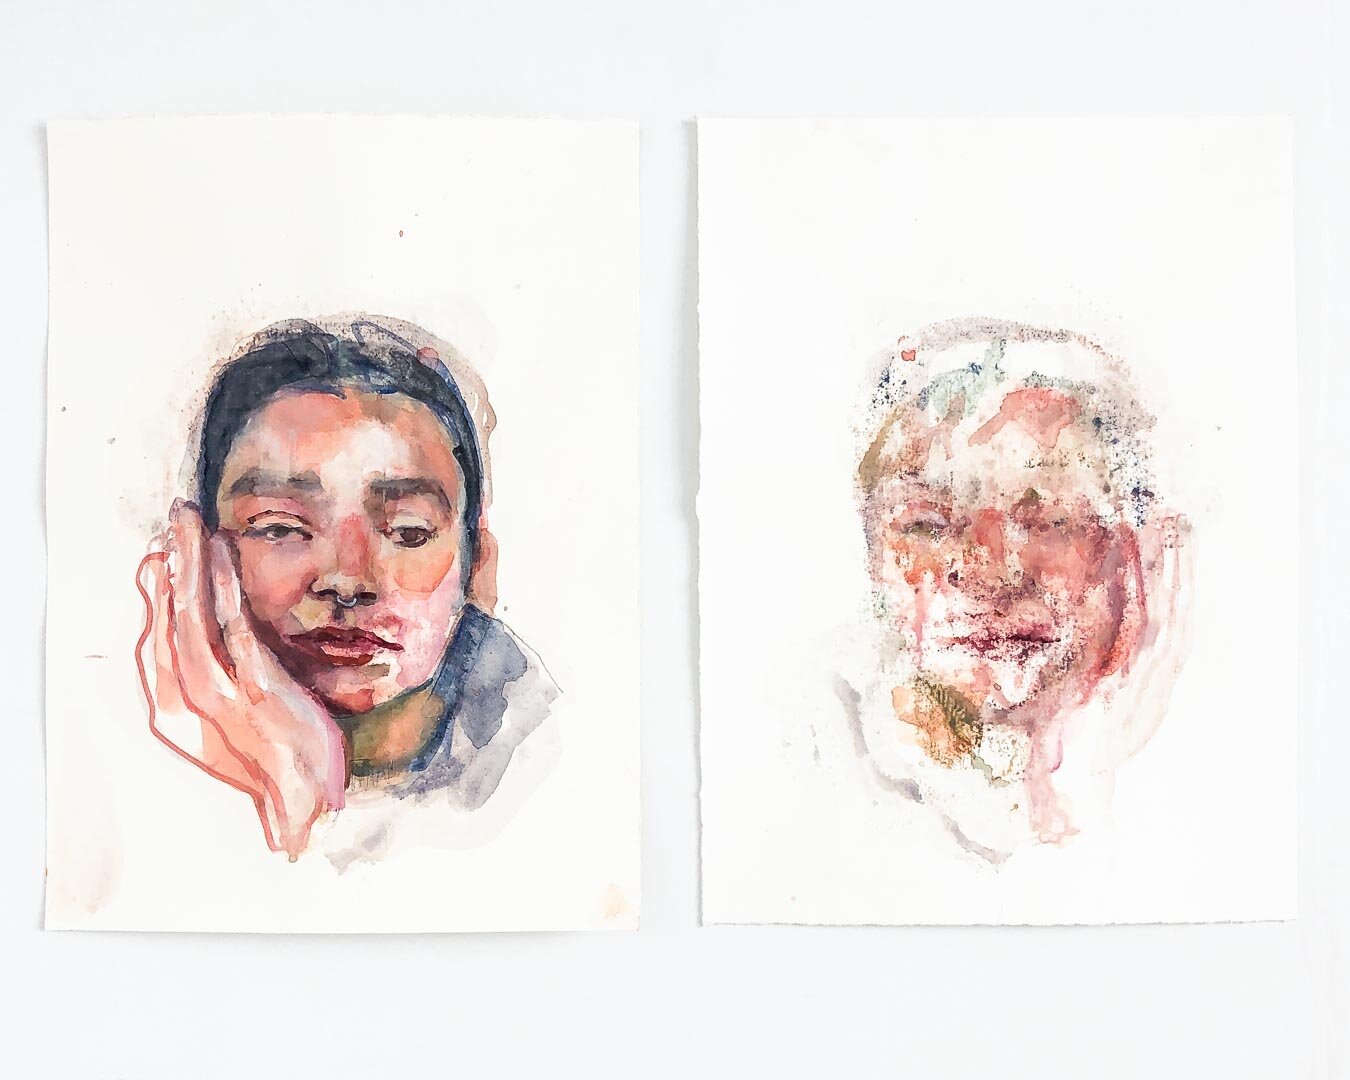   Emma   2021  watercolor and Guerra on paper   10” x 15” each 